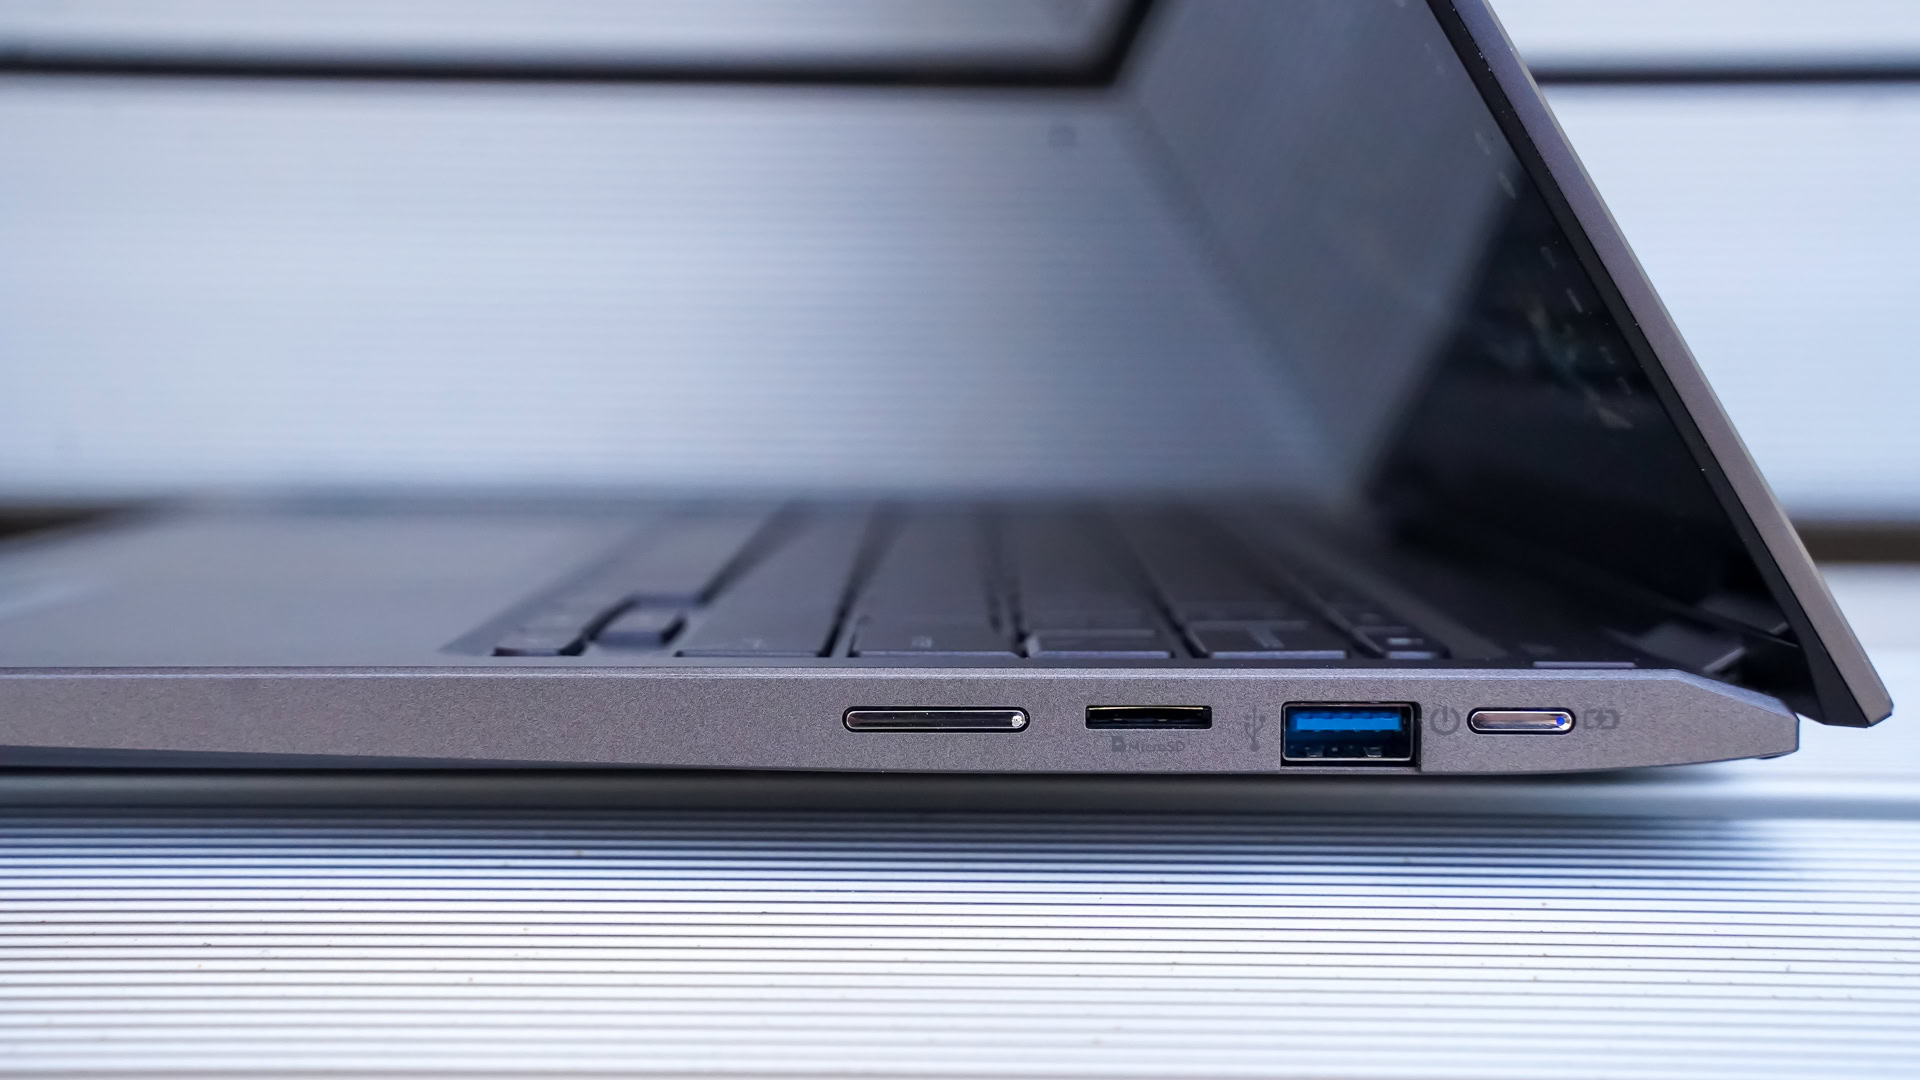 The Acer Chromebook Spin 713 side view showing the right ports.